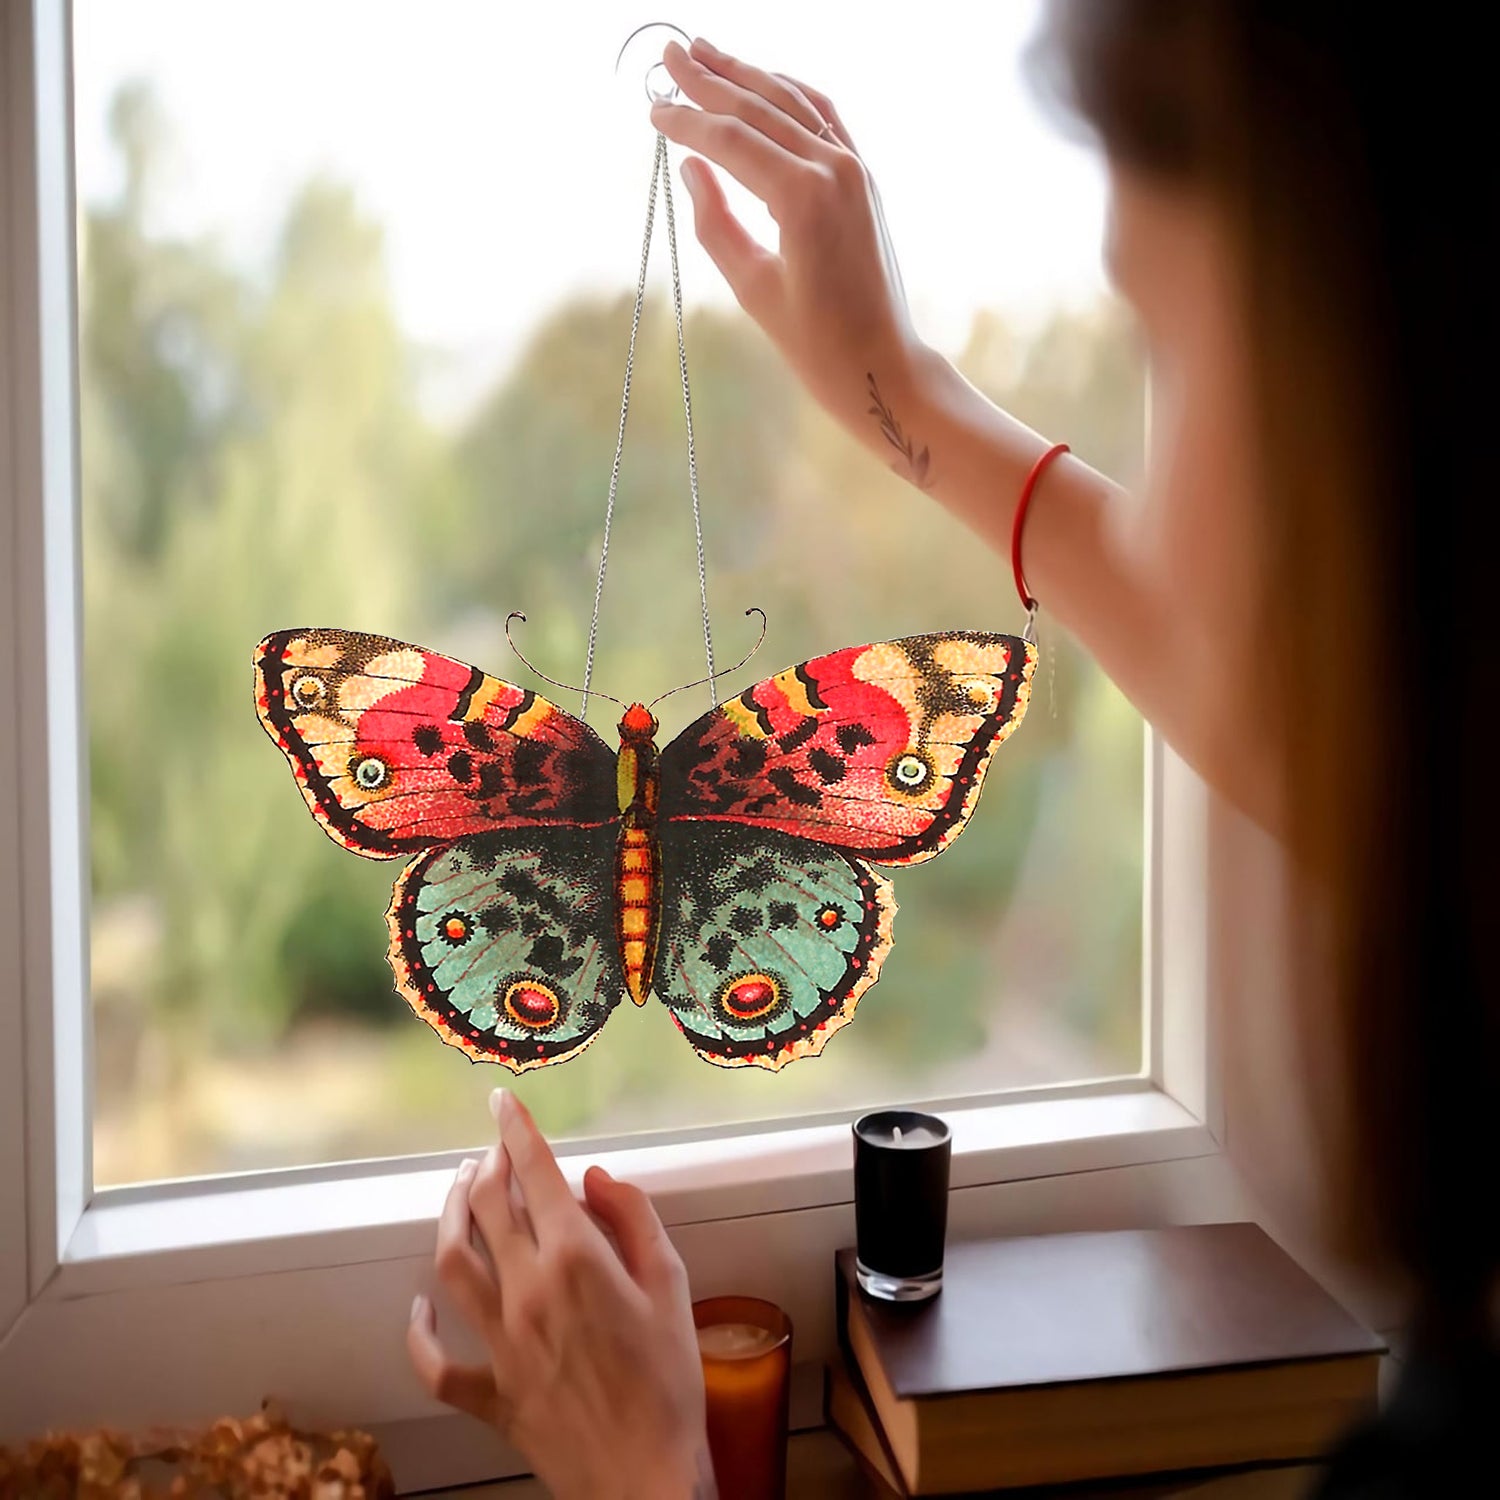 Butterfly 5 Window Mica Decor Home Decoration